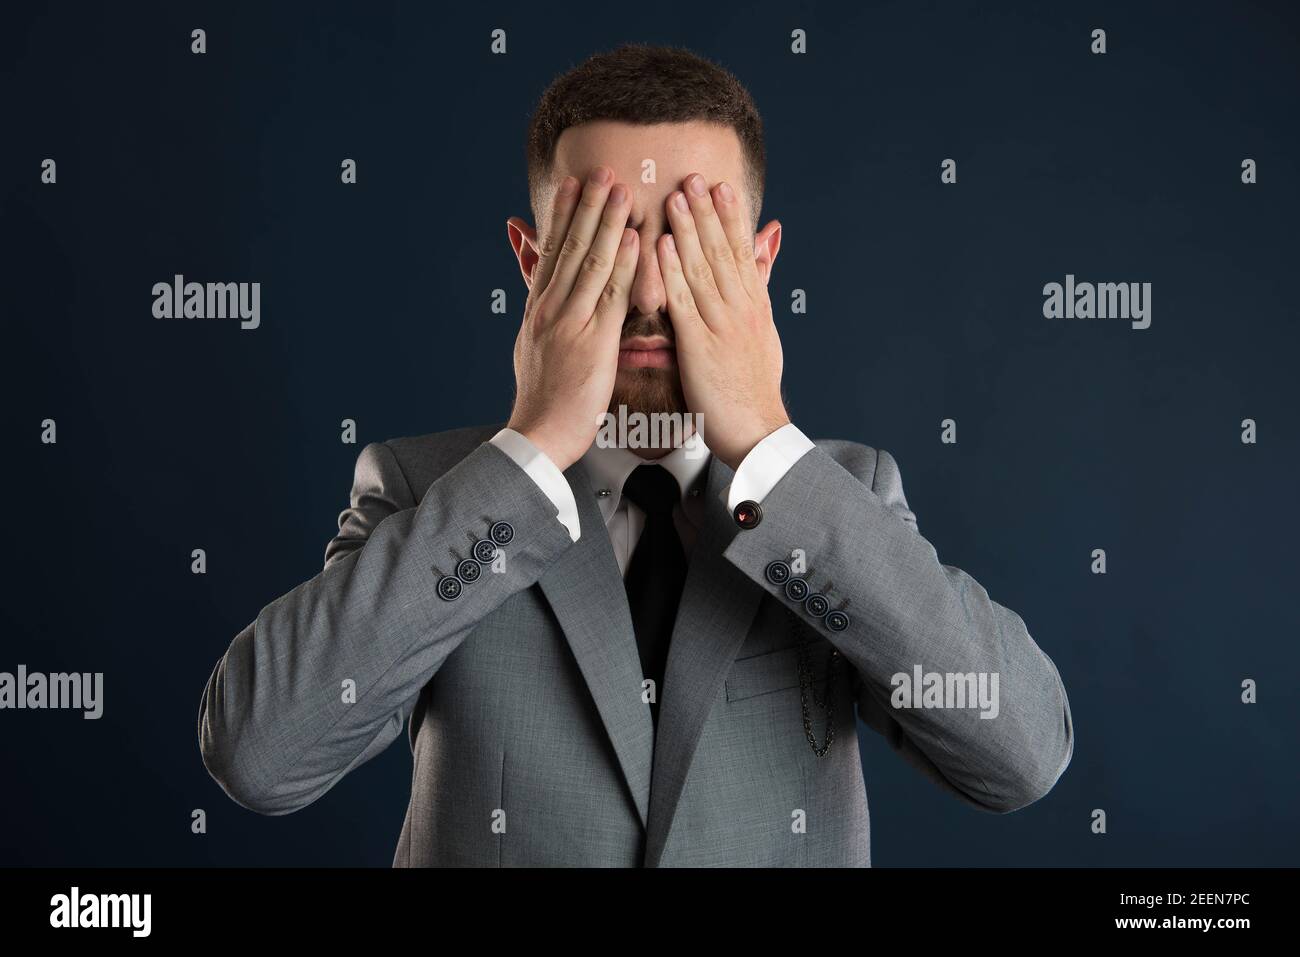 Handsome young businessman with his hands to his eyes wearing a grey suit and black tie Stock Photo